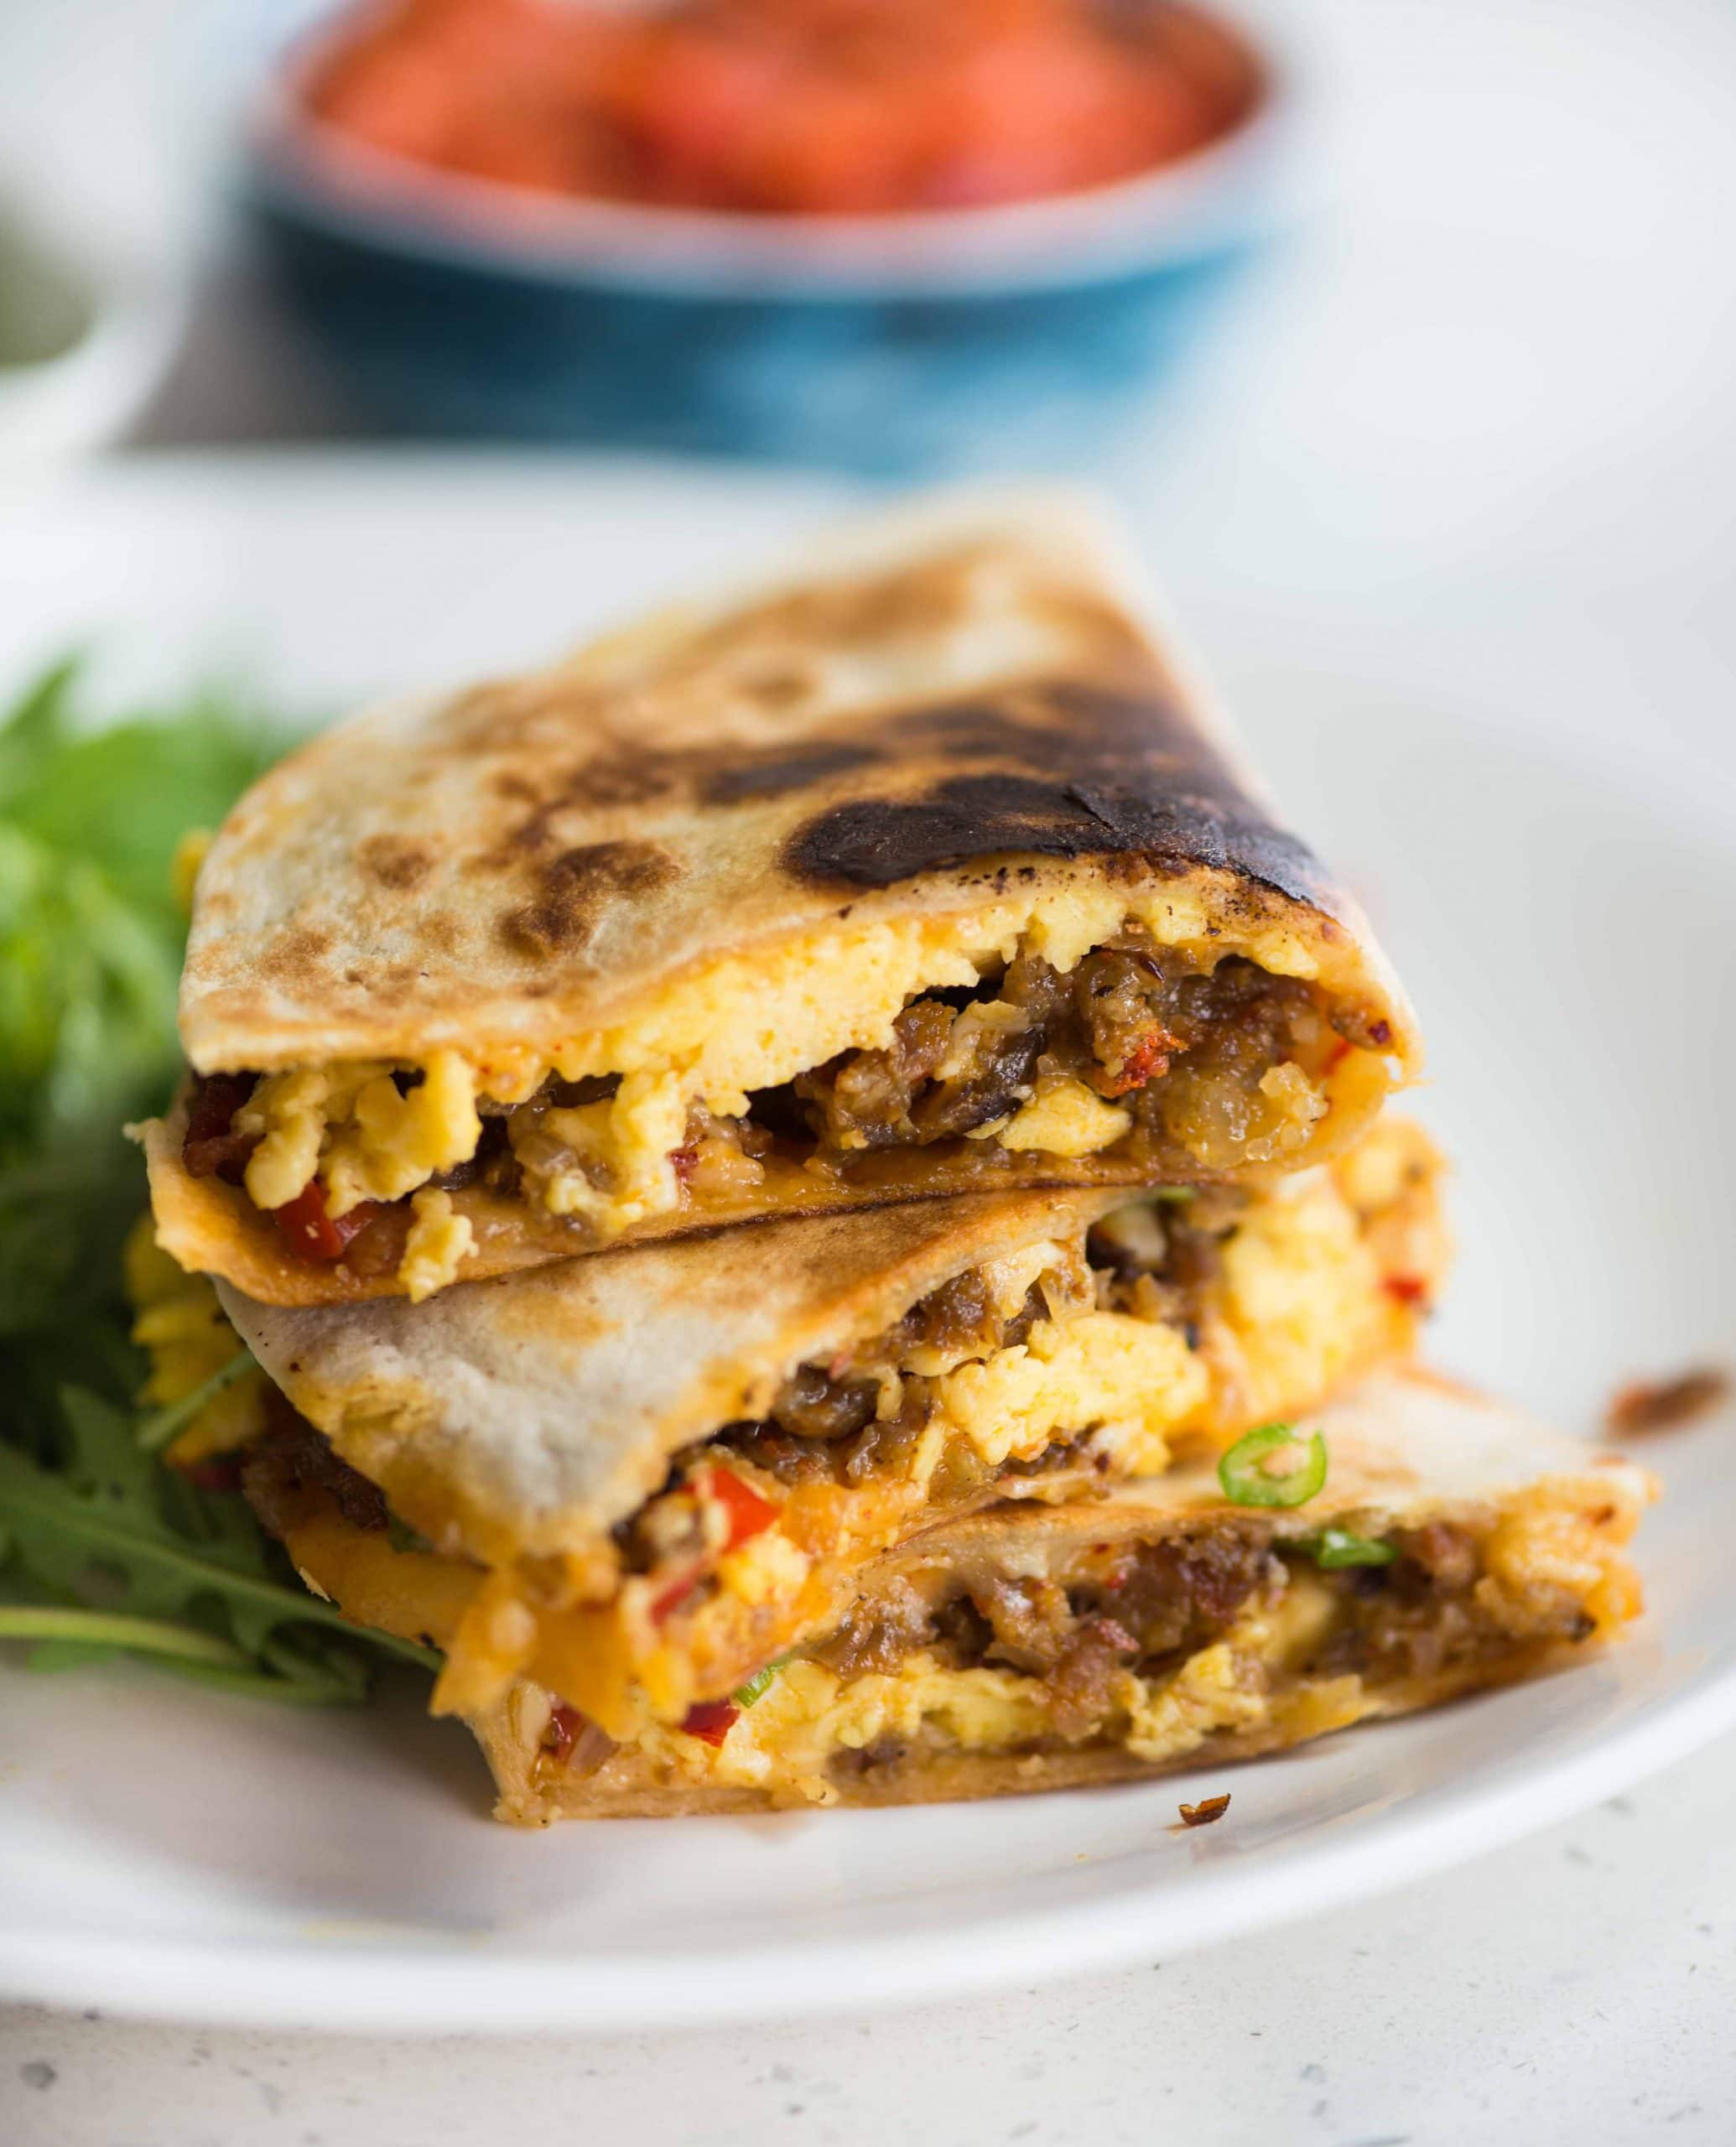 Crispy Tortilla filled with soft scrambled eggs, cheese, breakfast sausage, and bacon, Breakfast quesadilla is easy and quick to make. These quesadillas are perfect for breakfast, brunch, or even dinner.